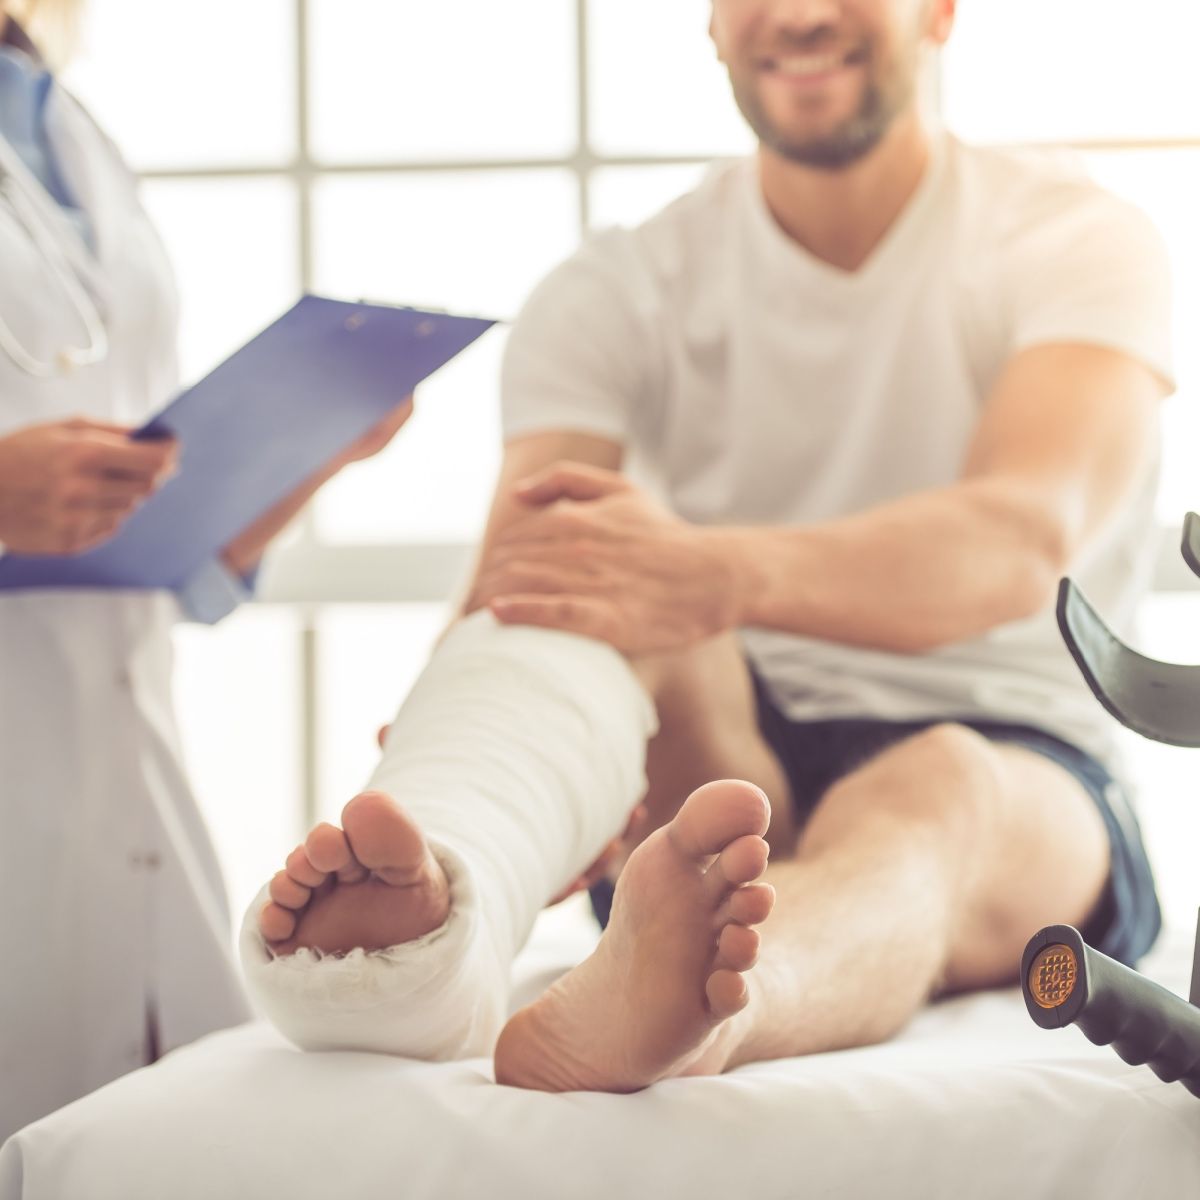 Advanced wound care solutions for your practice